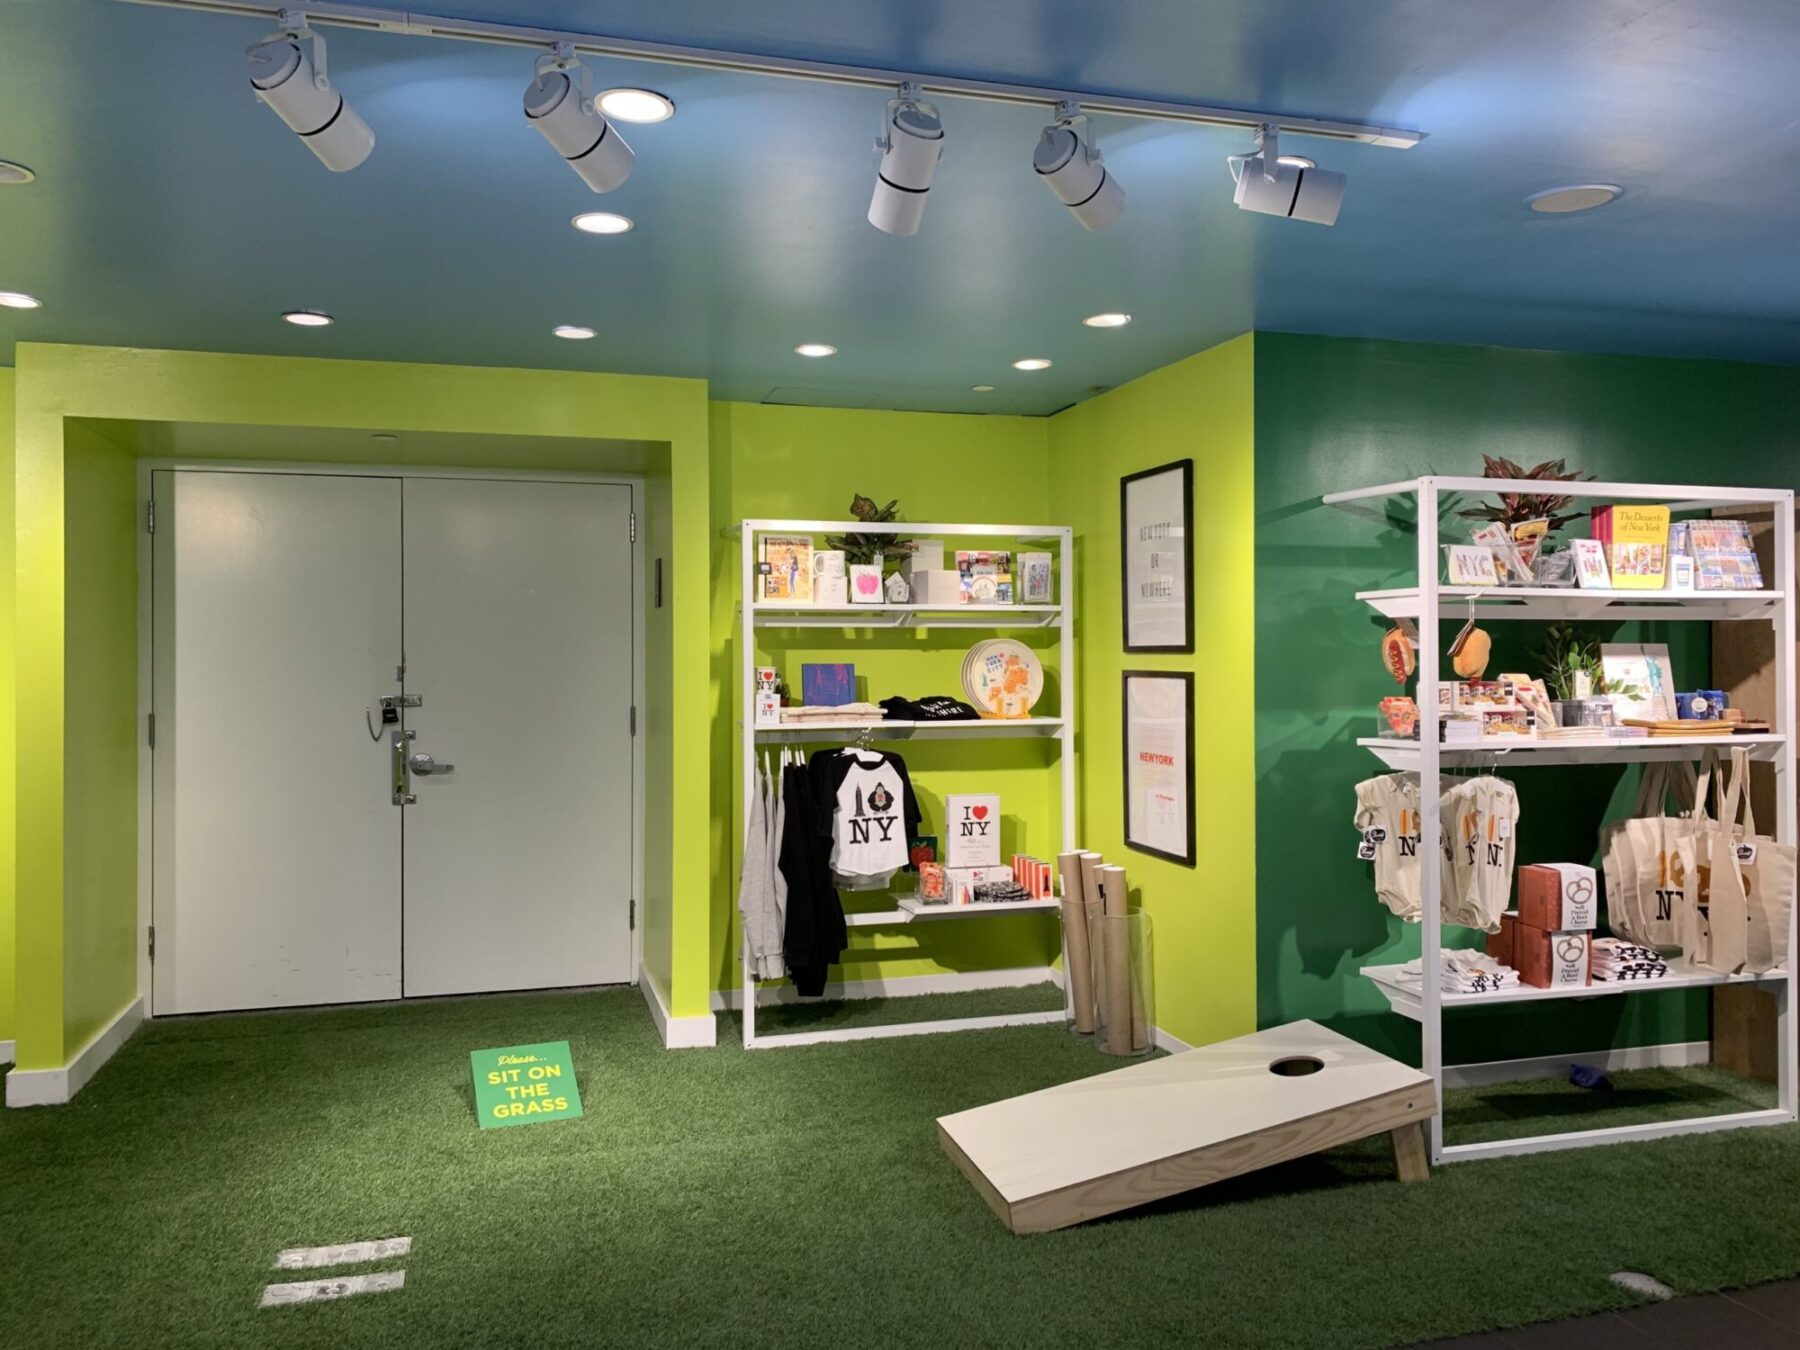 Artificial grass installation in commercial space